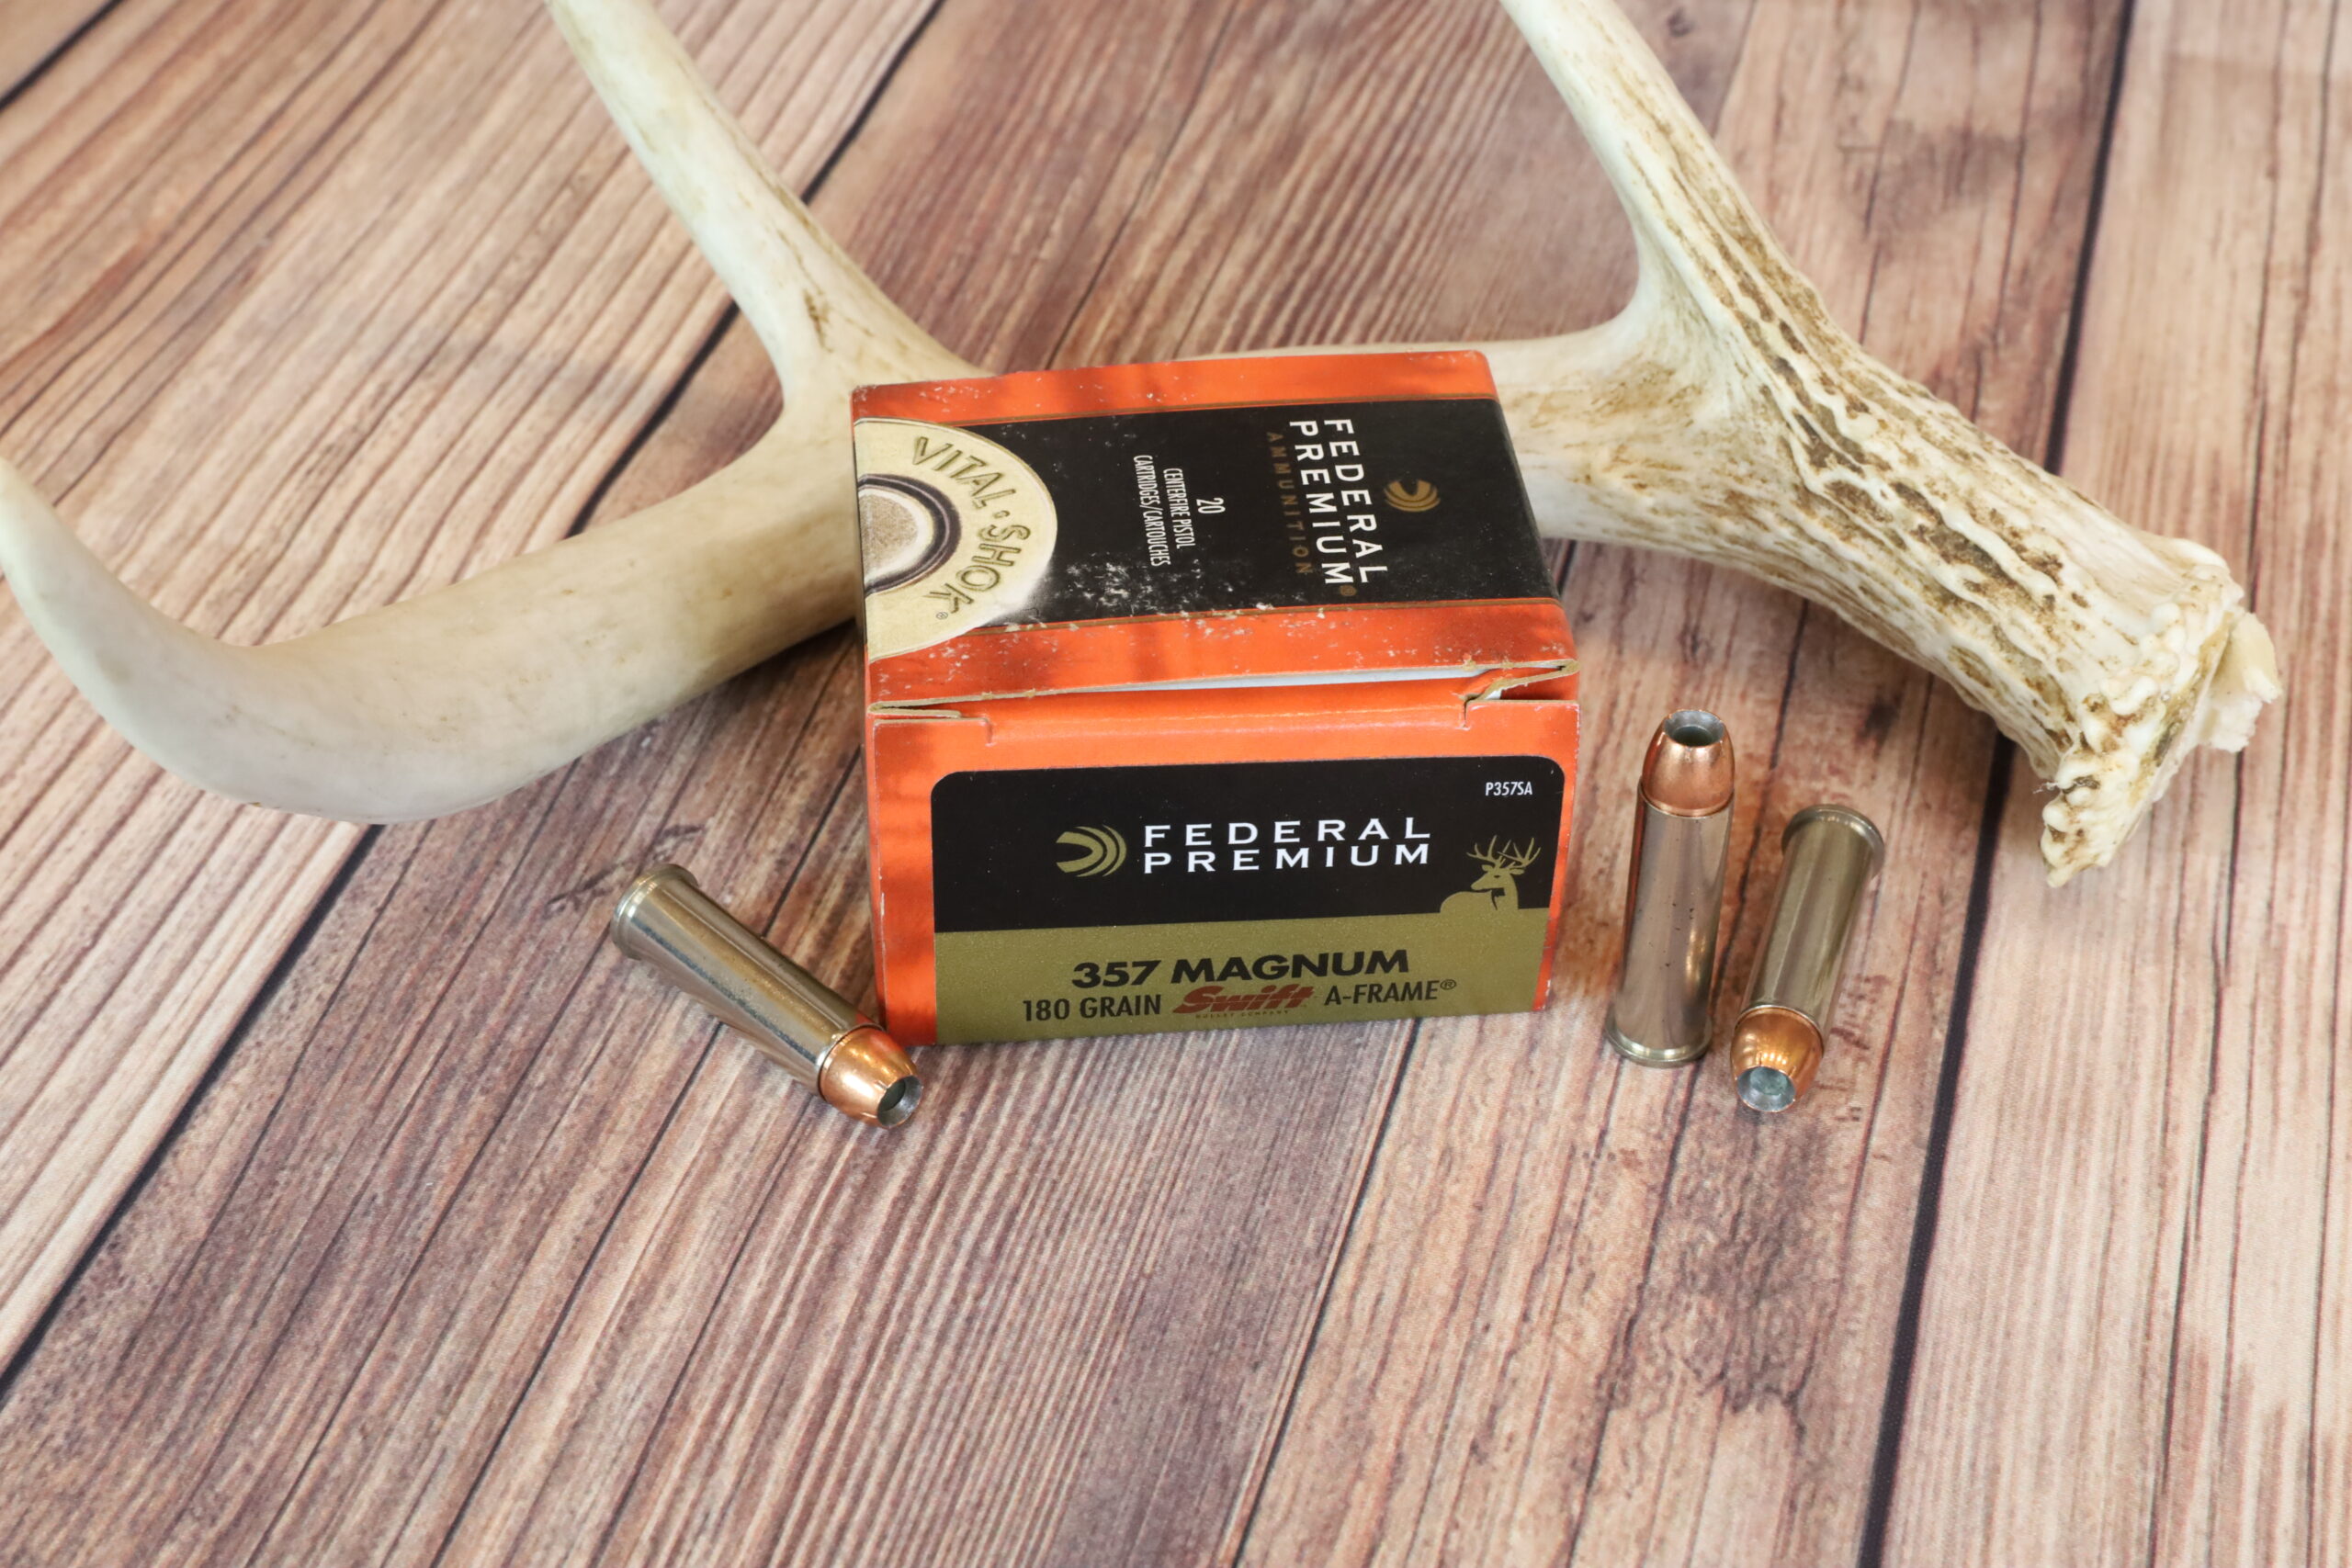 Swift A-frame's proved a level of consistency few cartridges can match.